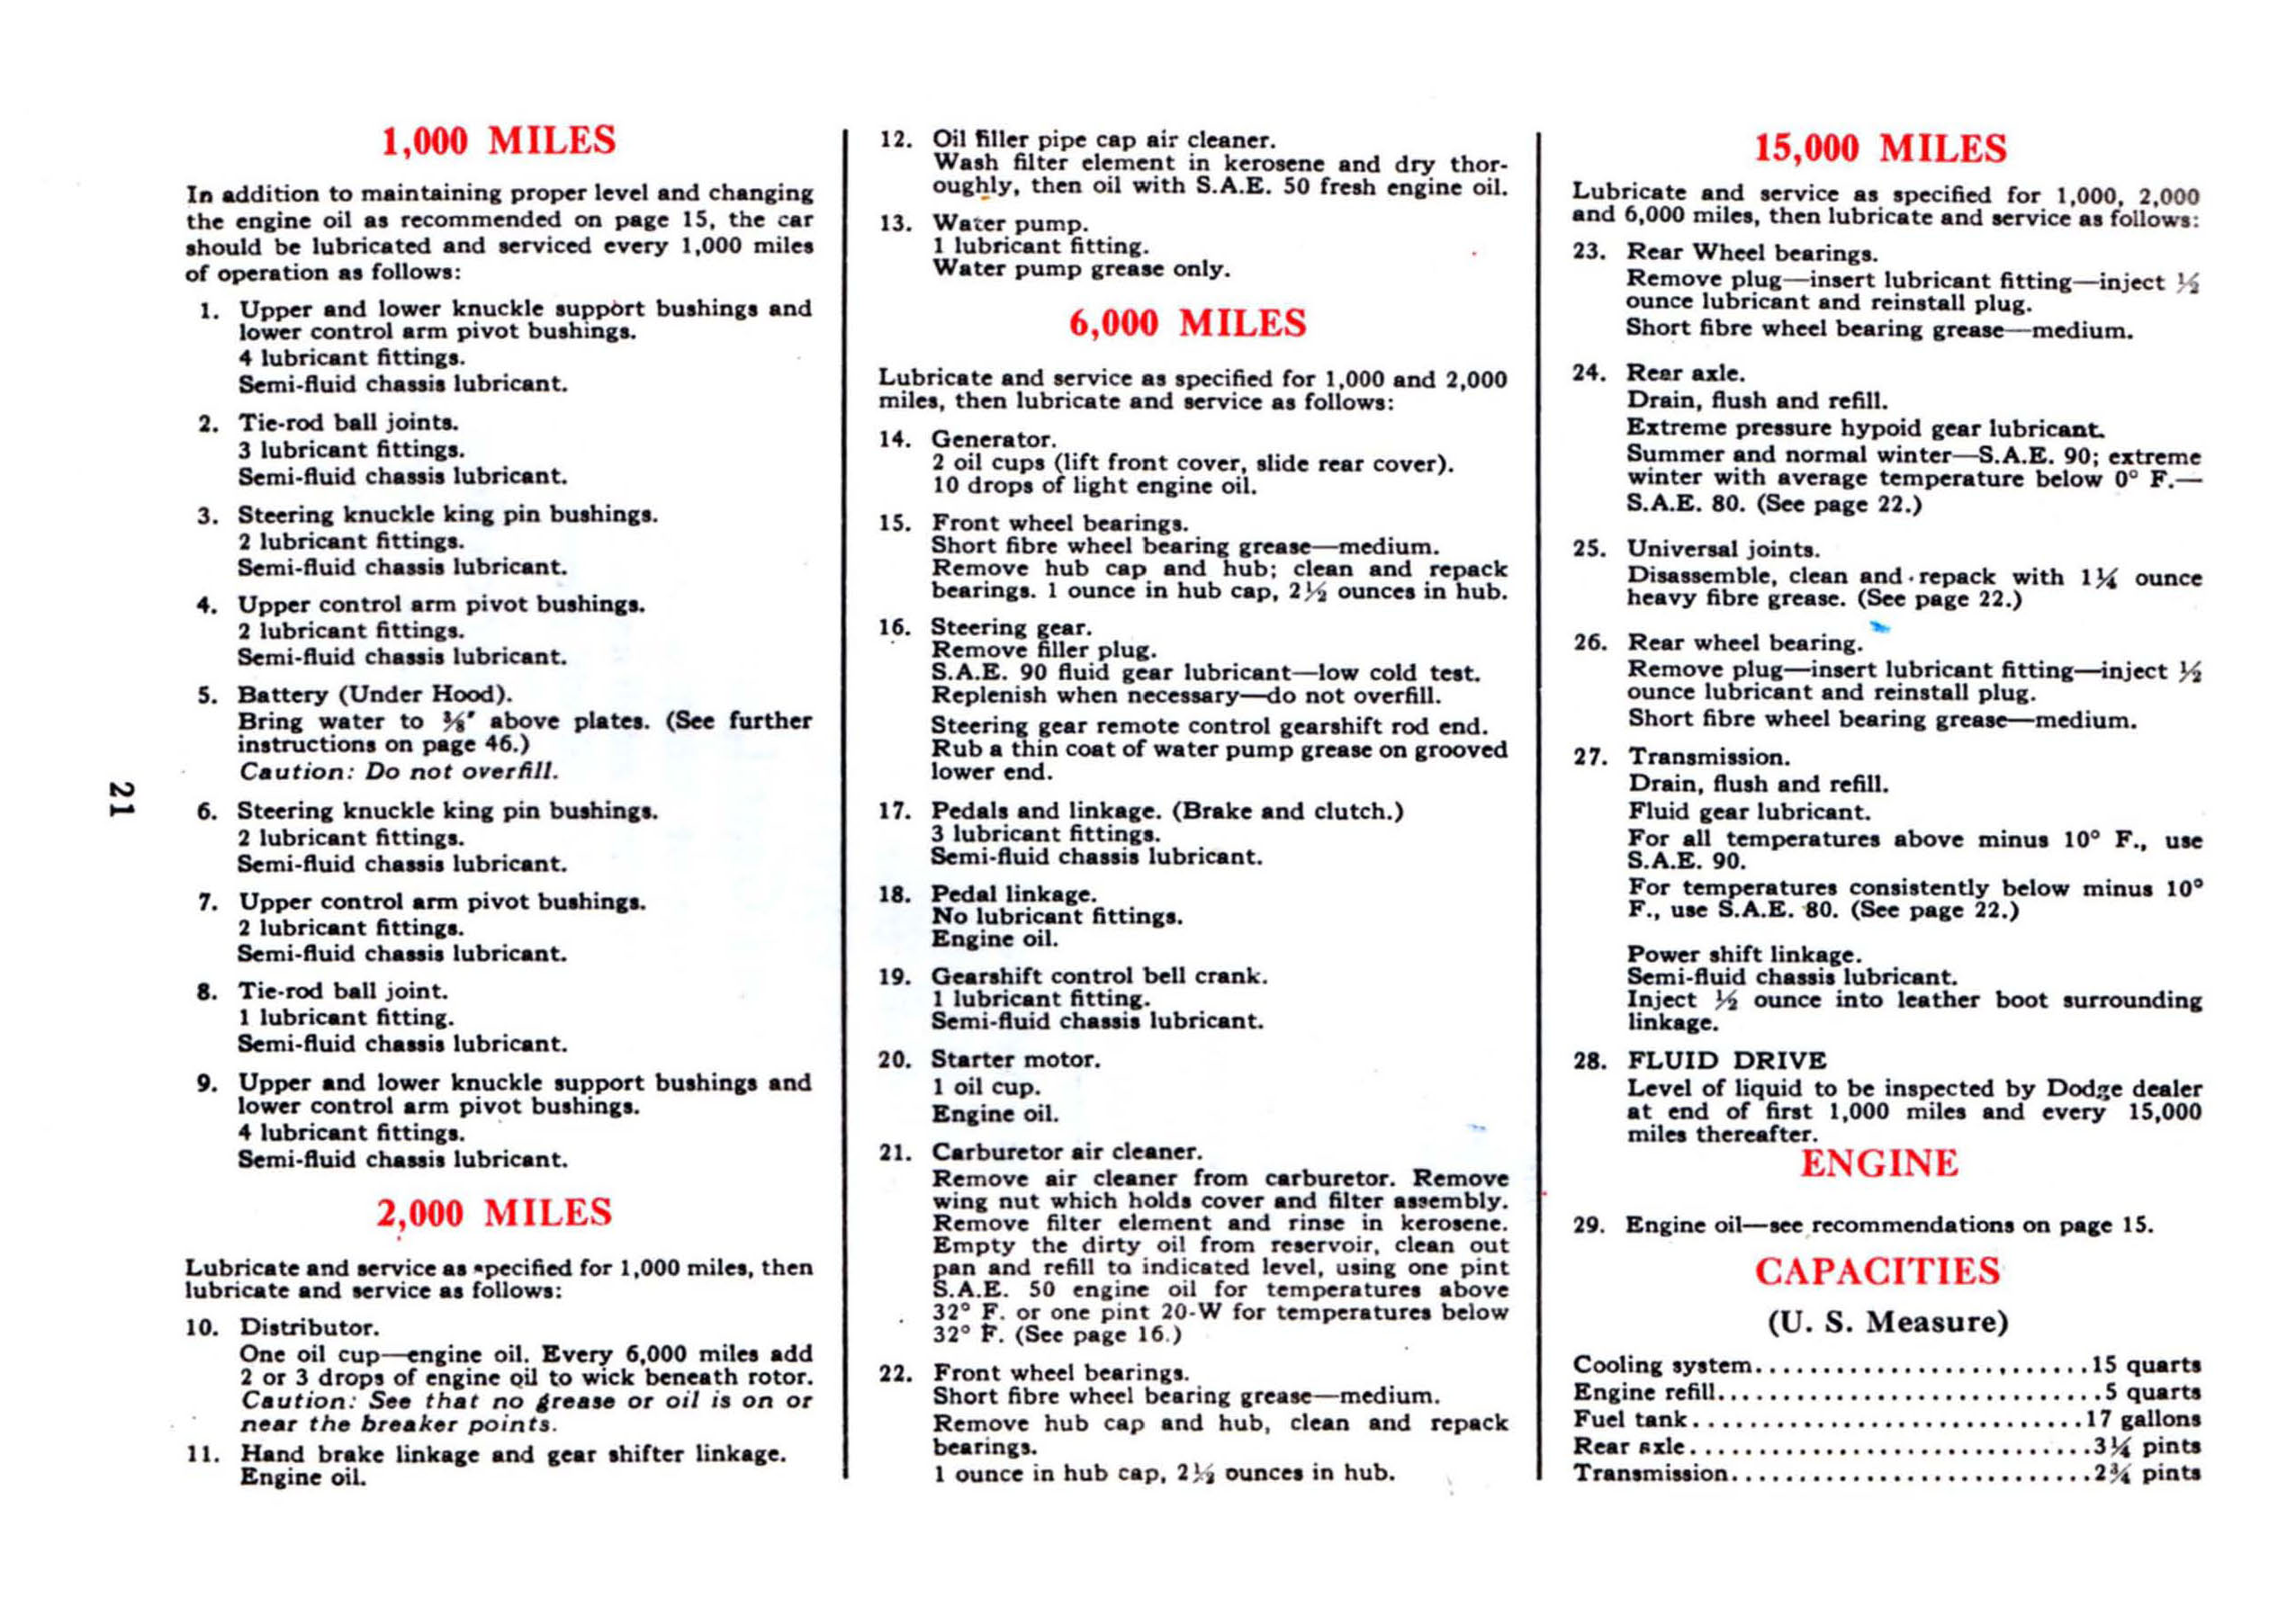 1941_Dodge_Owners_Manual-21